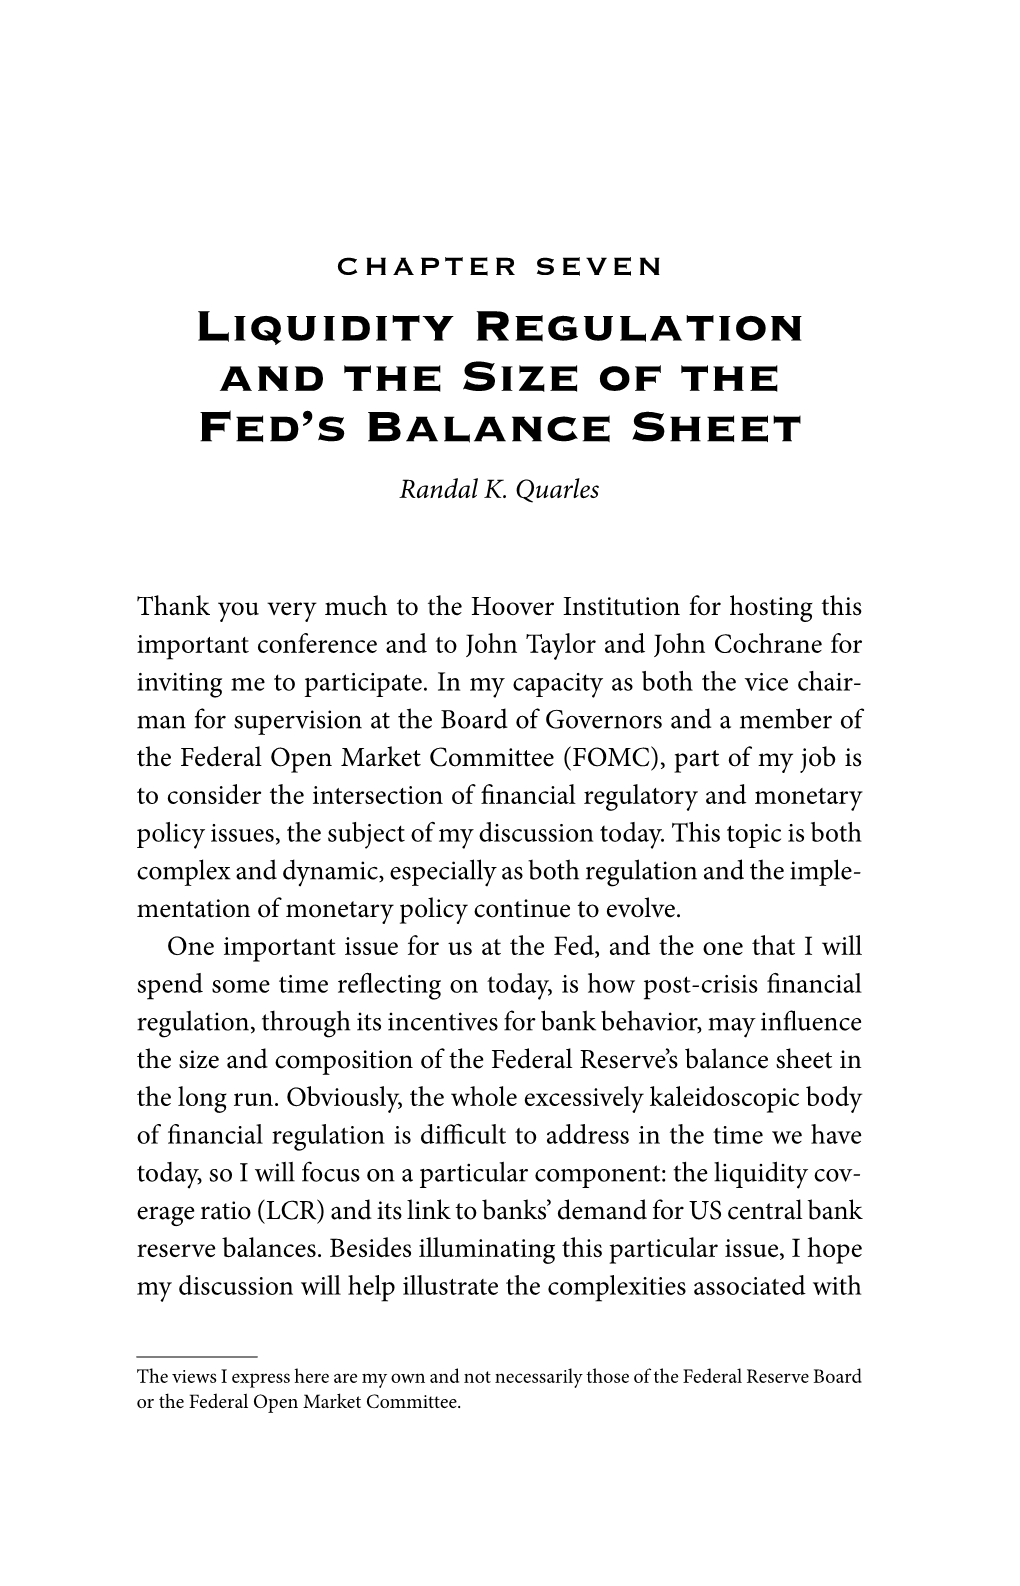 Liquidity Regulation and the Size of the Fed's Balance Sheet